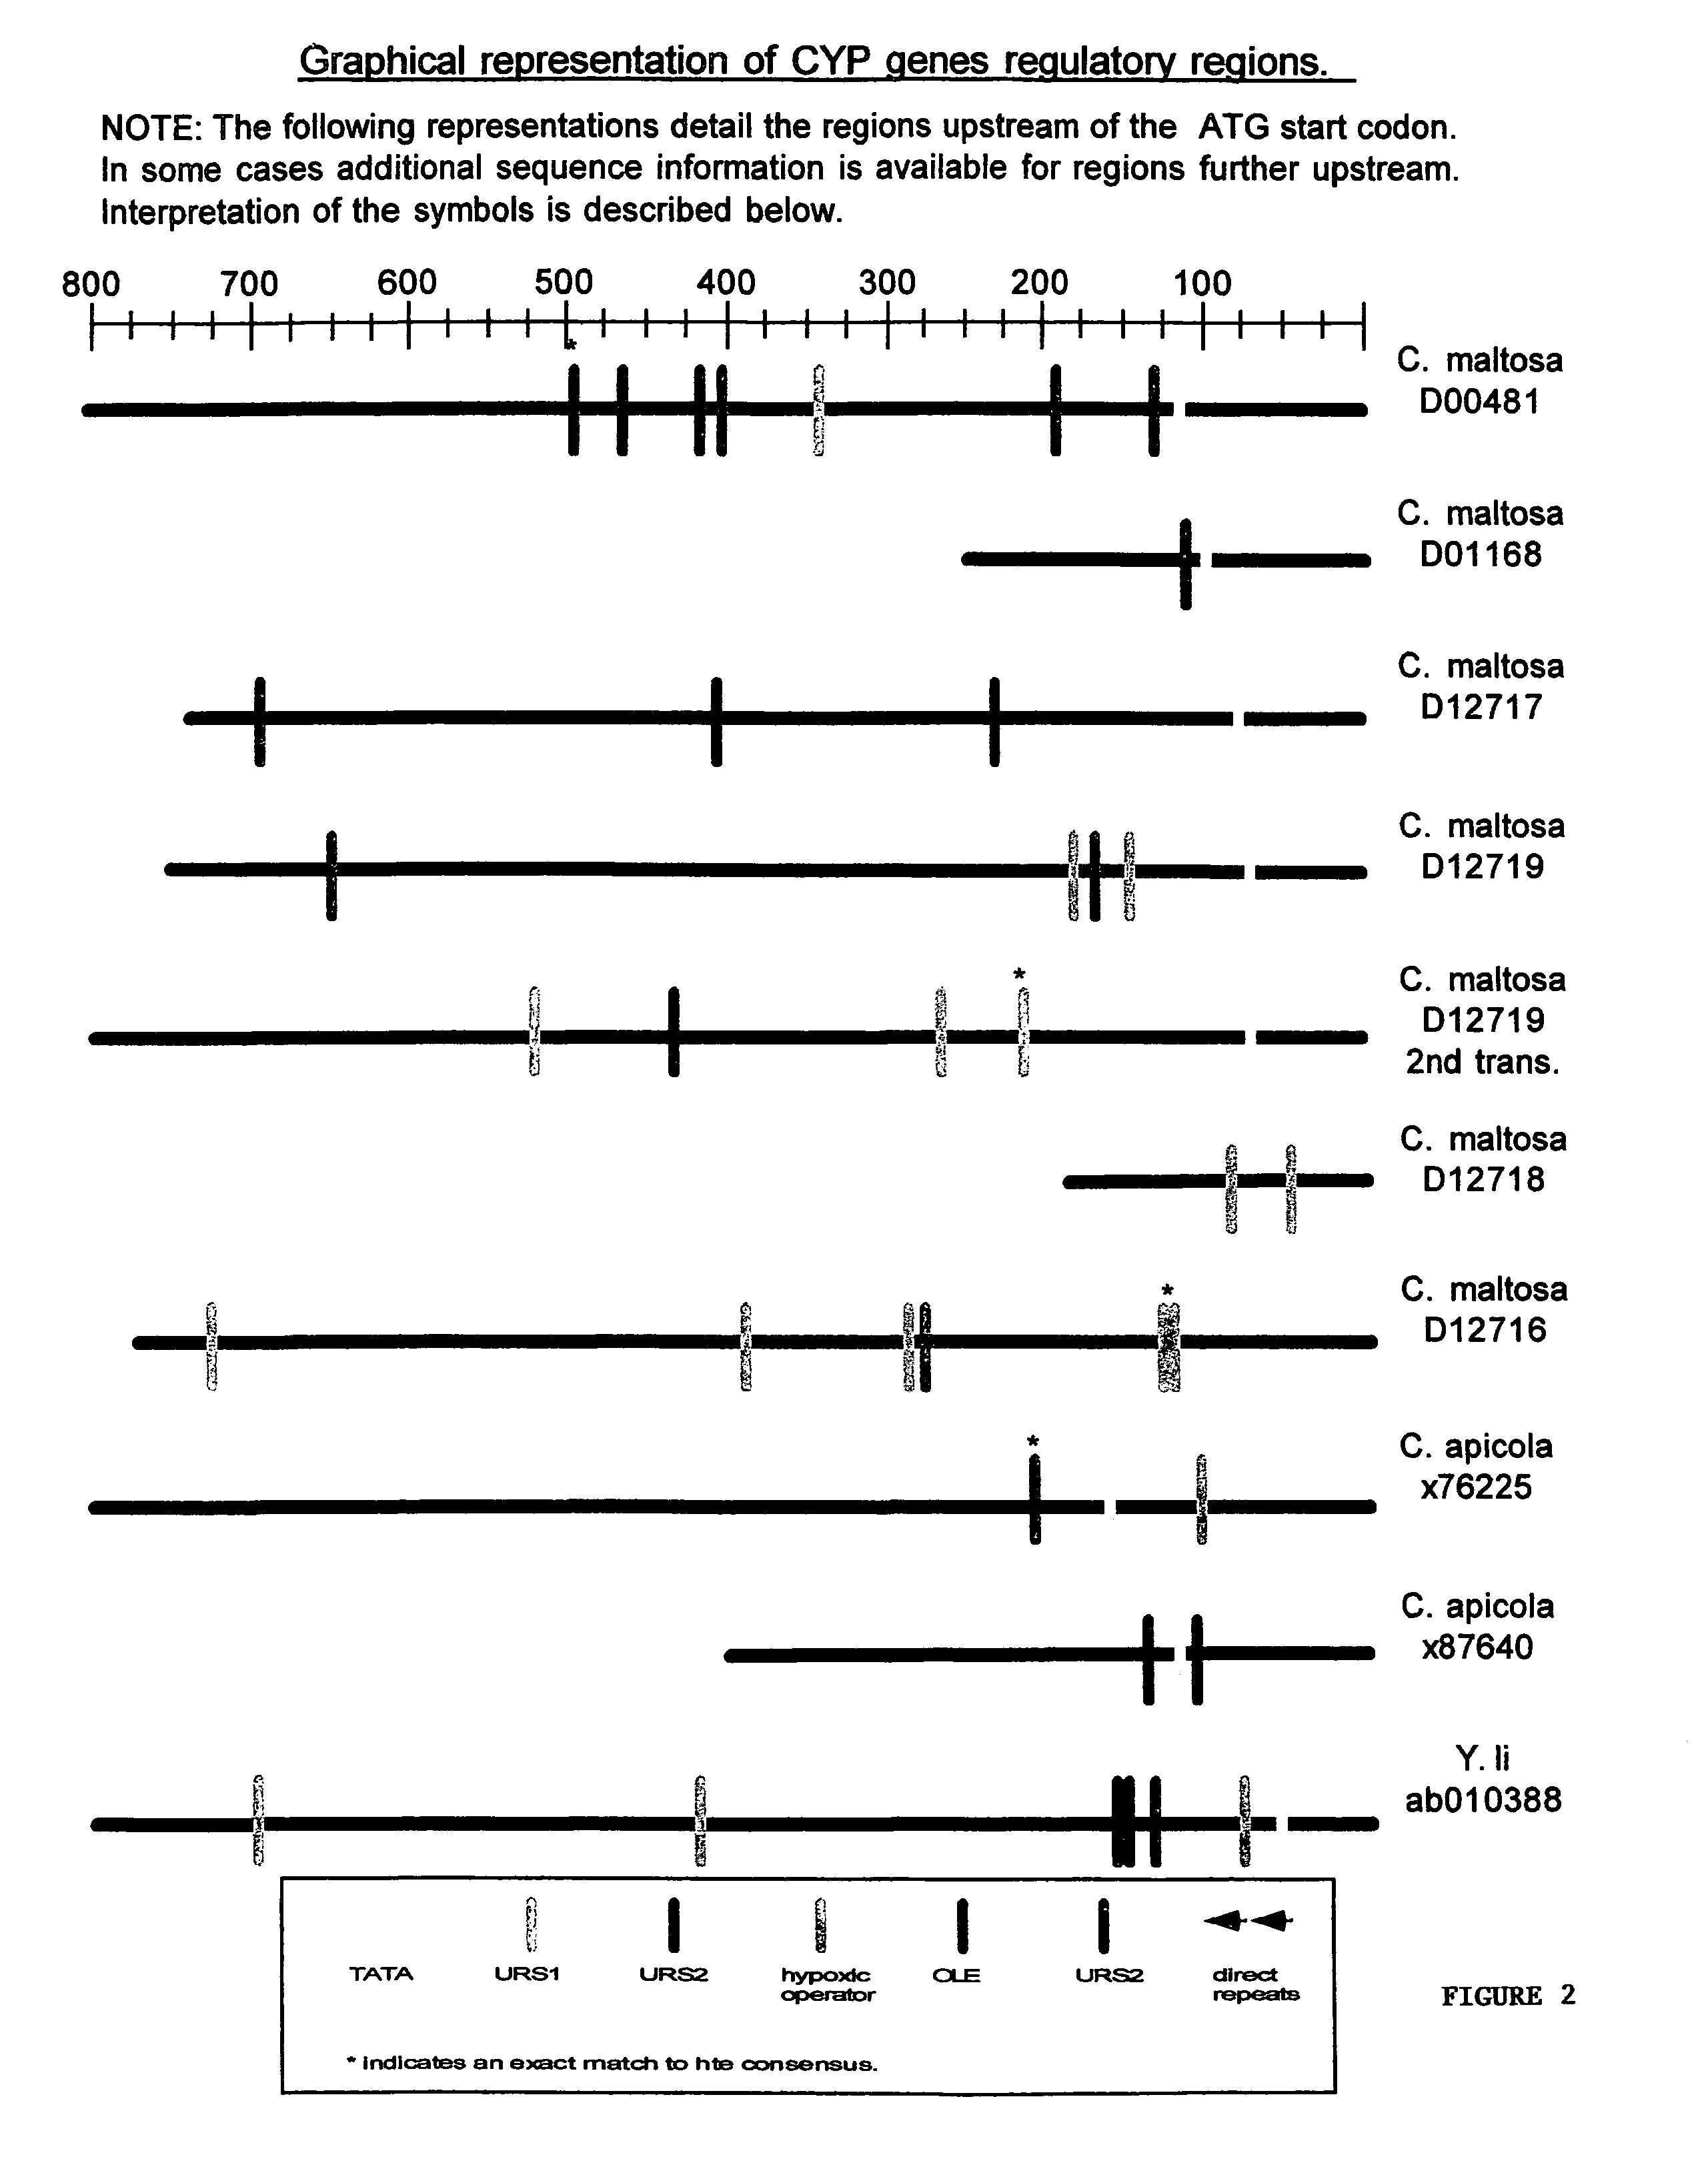 Promoter motifs in Candida tropicalis